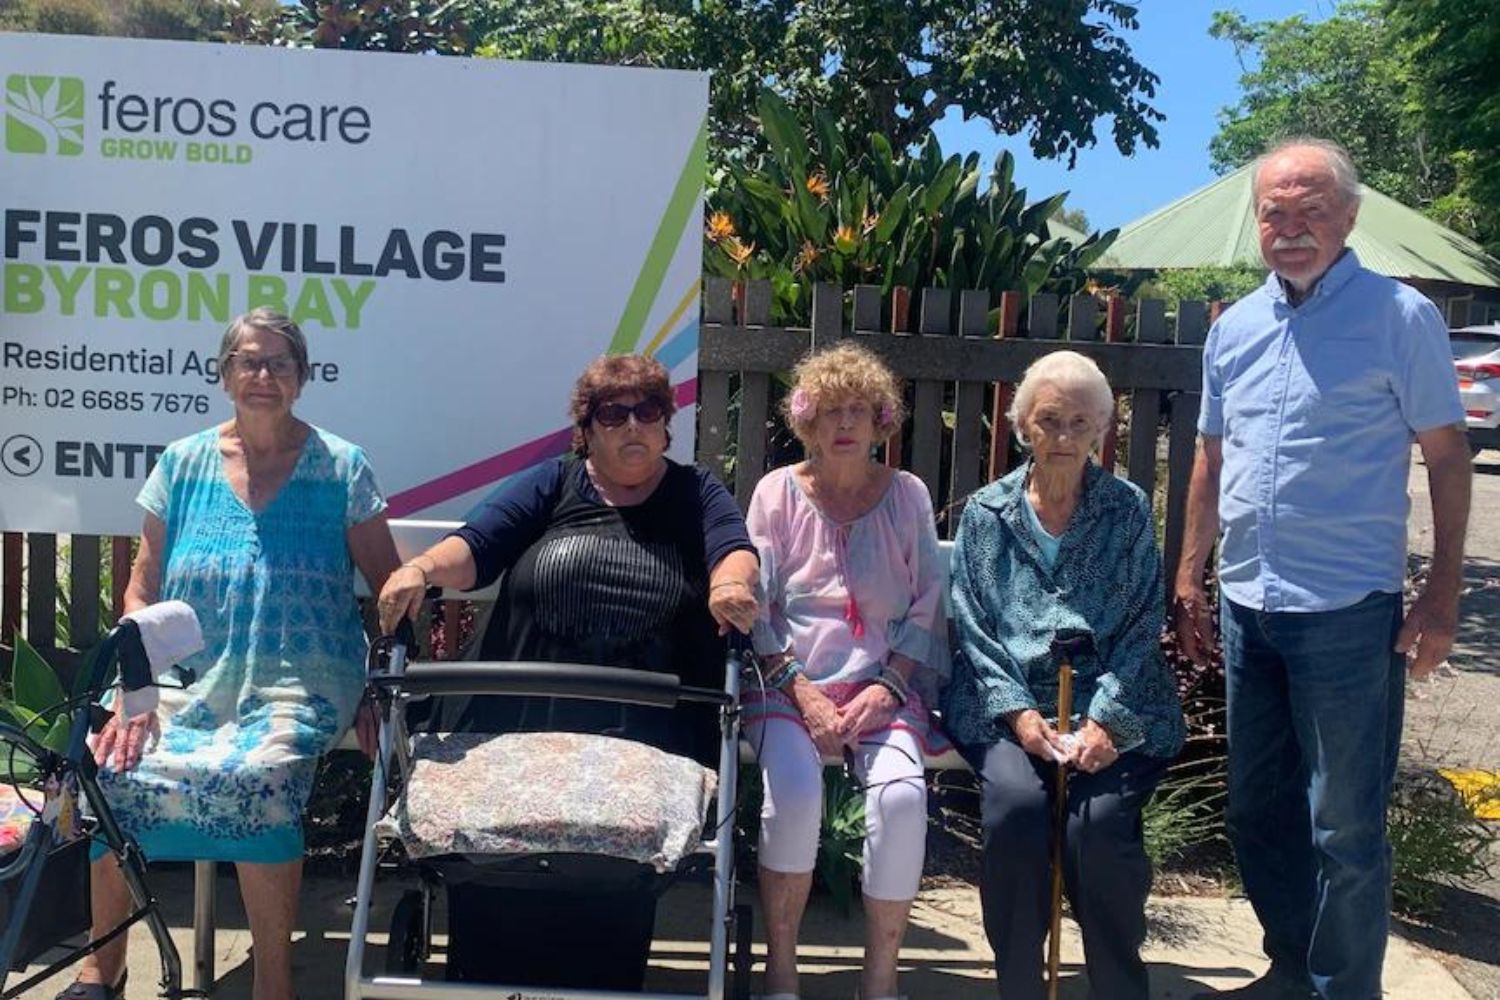 “I’m not going anywhere”: Residents defy aged care village marching orders